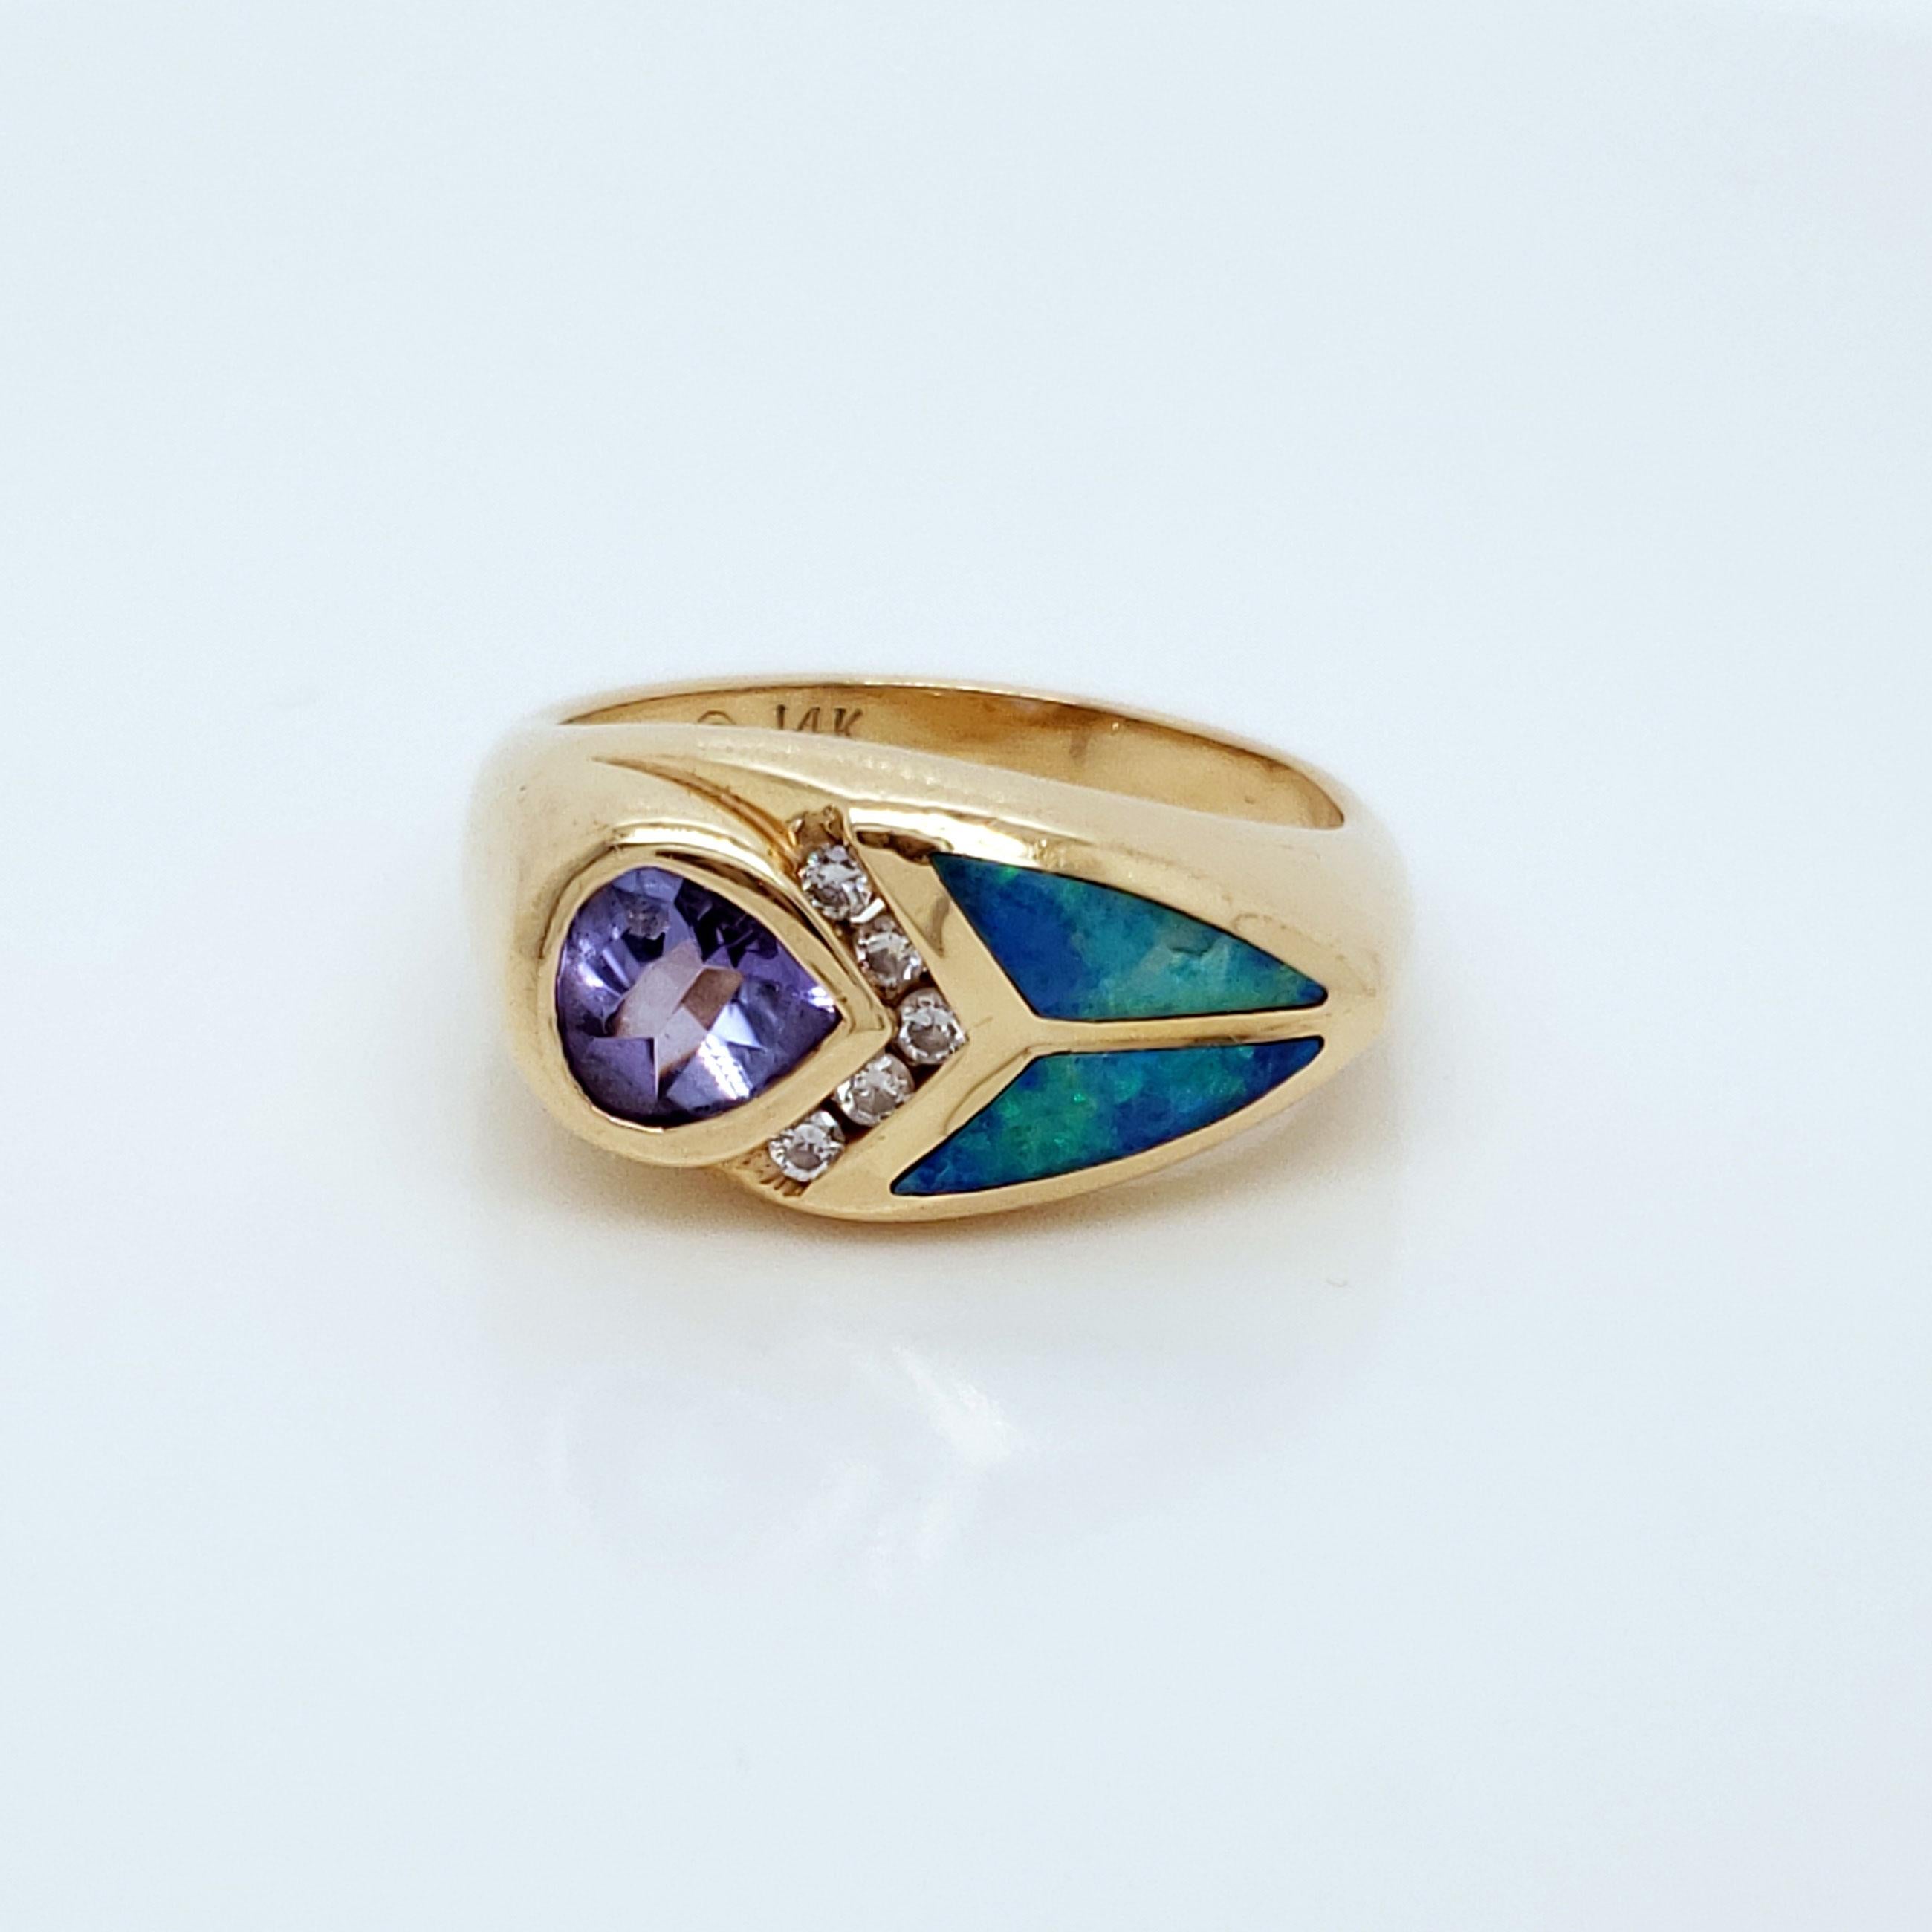 This ring is stunning! The inlaid opal catches the light just right, sending sparkles flying everywhere! Five tiny diamonds, at .075 cttw, are the perfect divide between the gorgeous opal panes and the breathtaking tanzanite! The 6mm periwinkle-hue